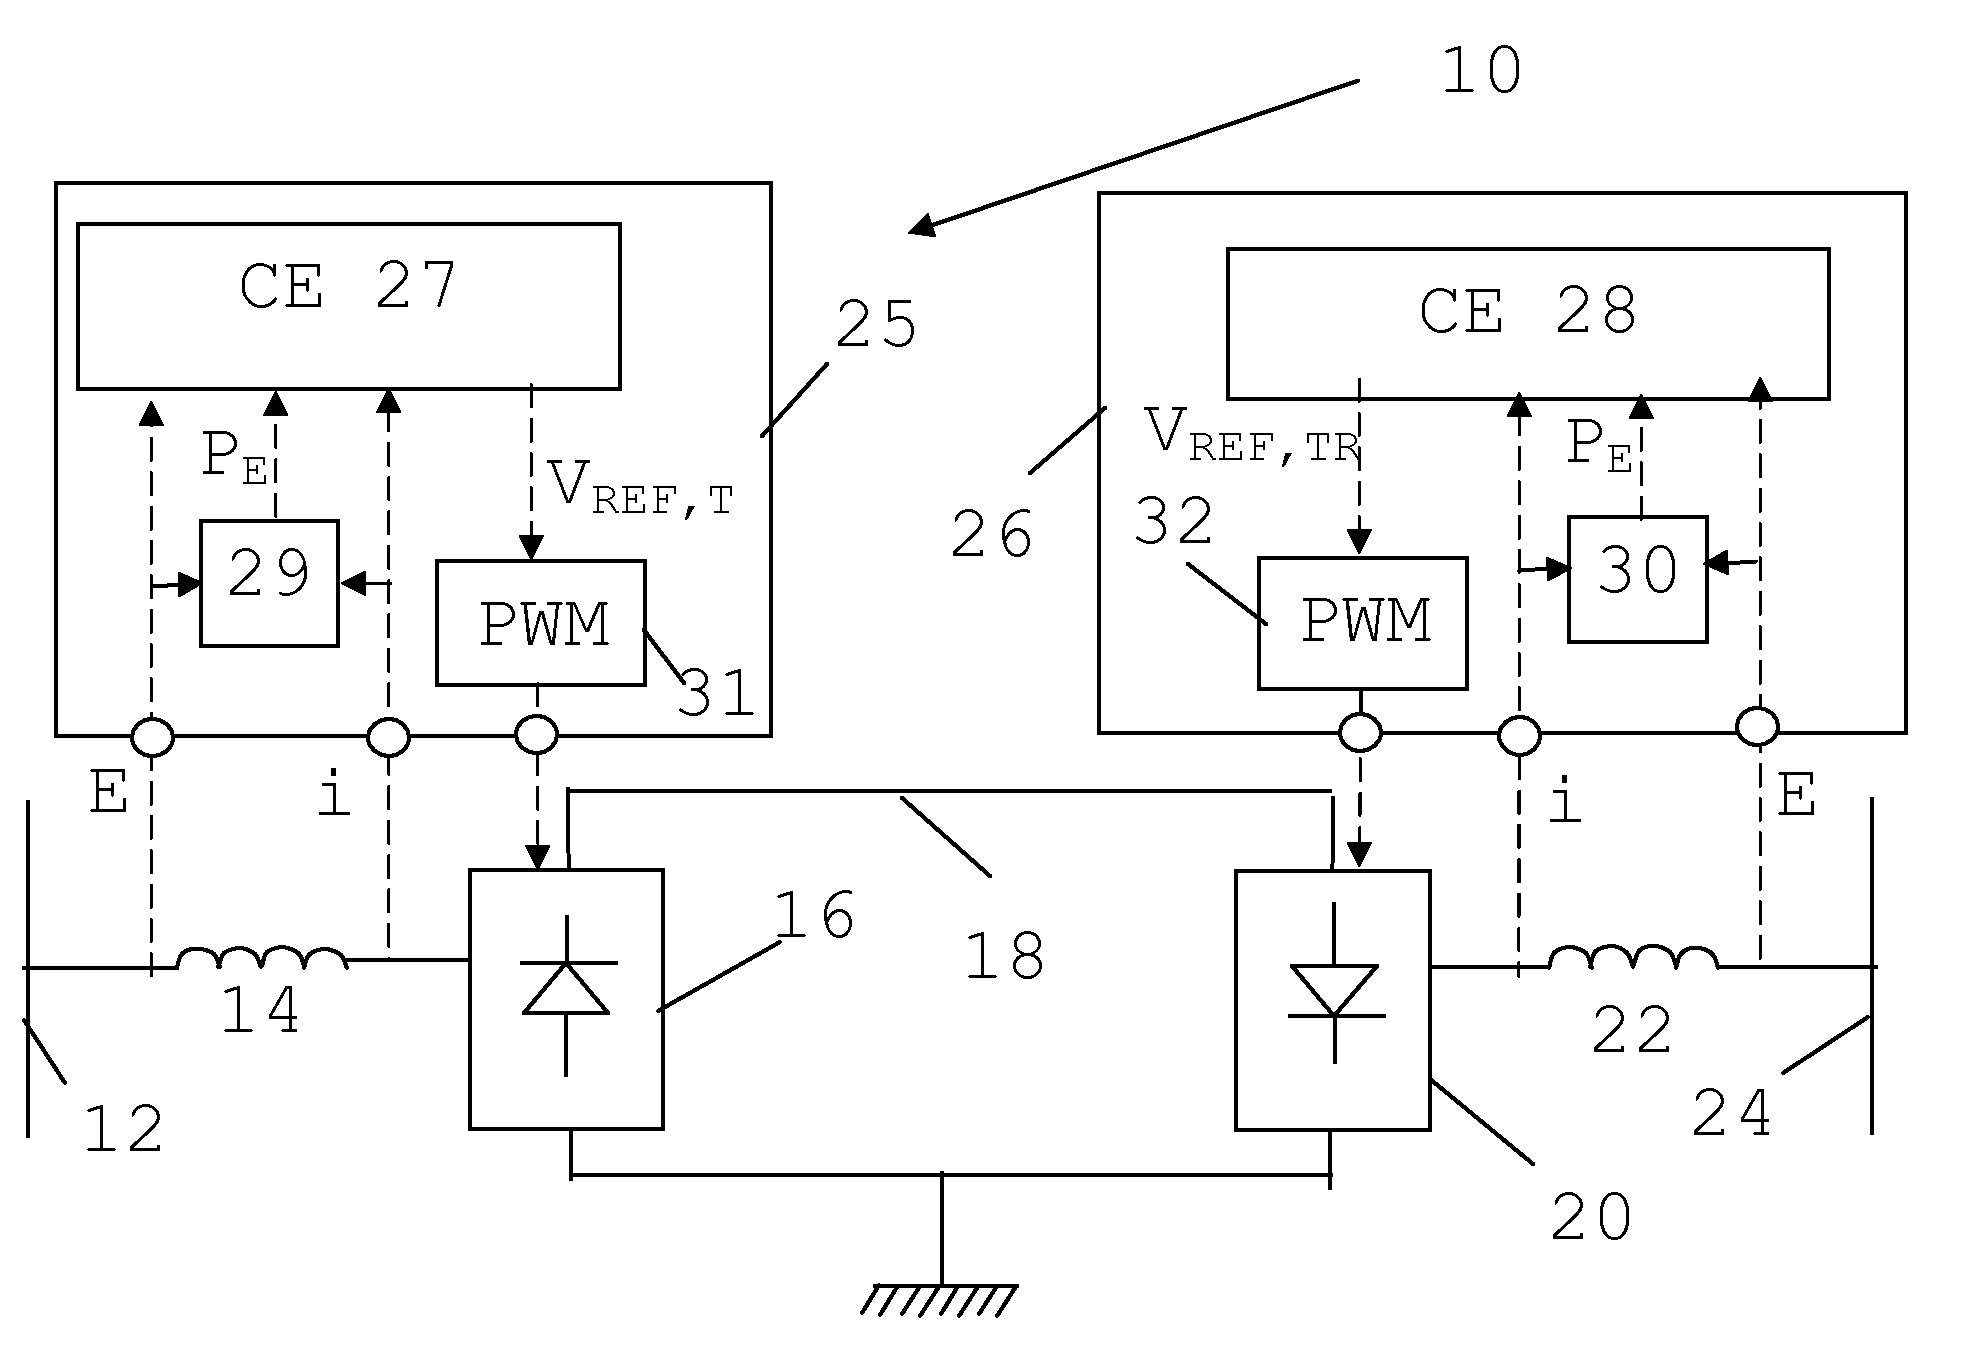 Control of a voltage source converter using synchronous machine emulation